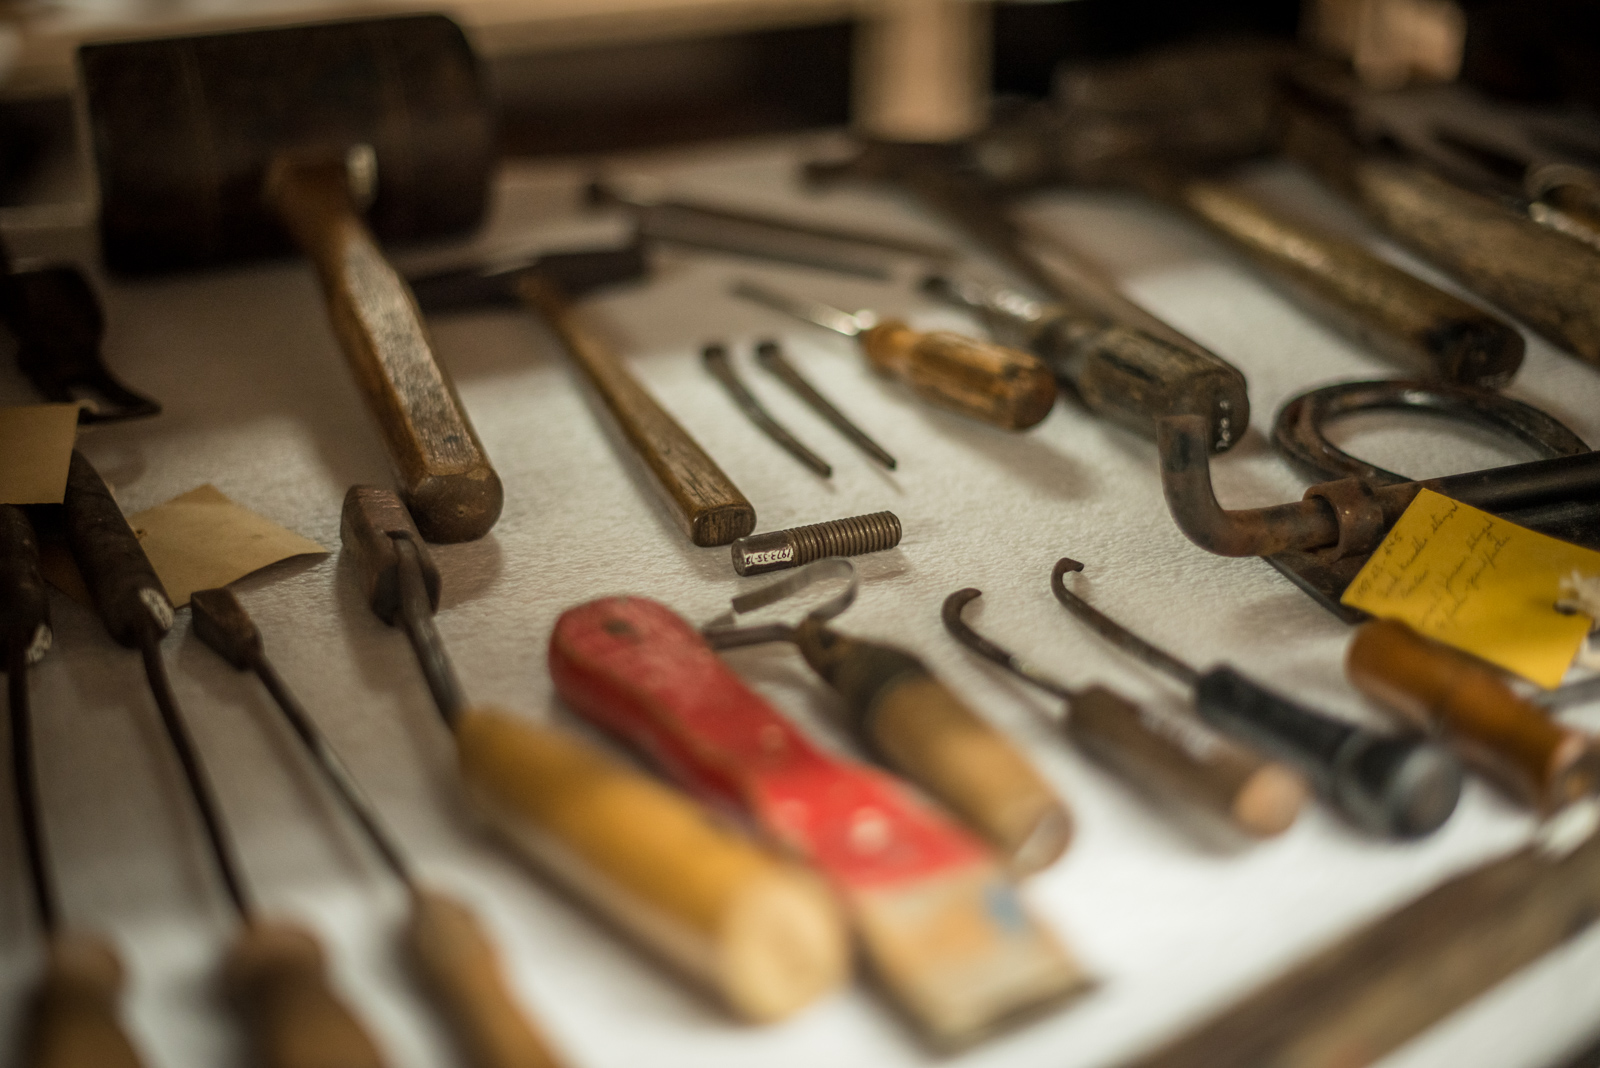 Assortment of hand tools from the Museum’s collection